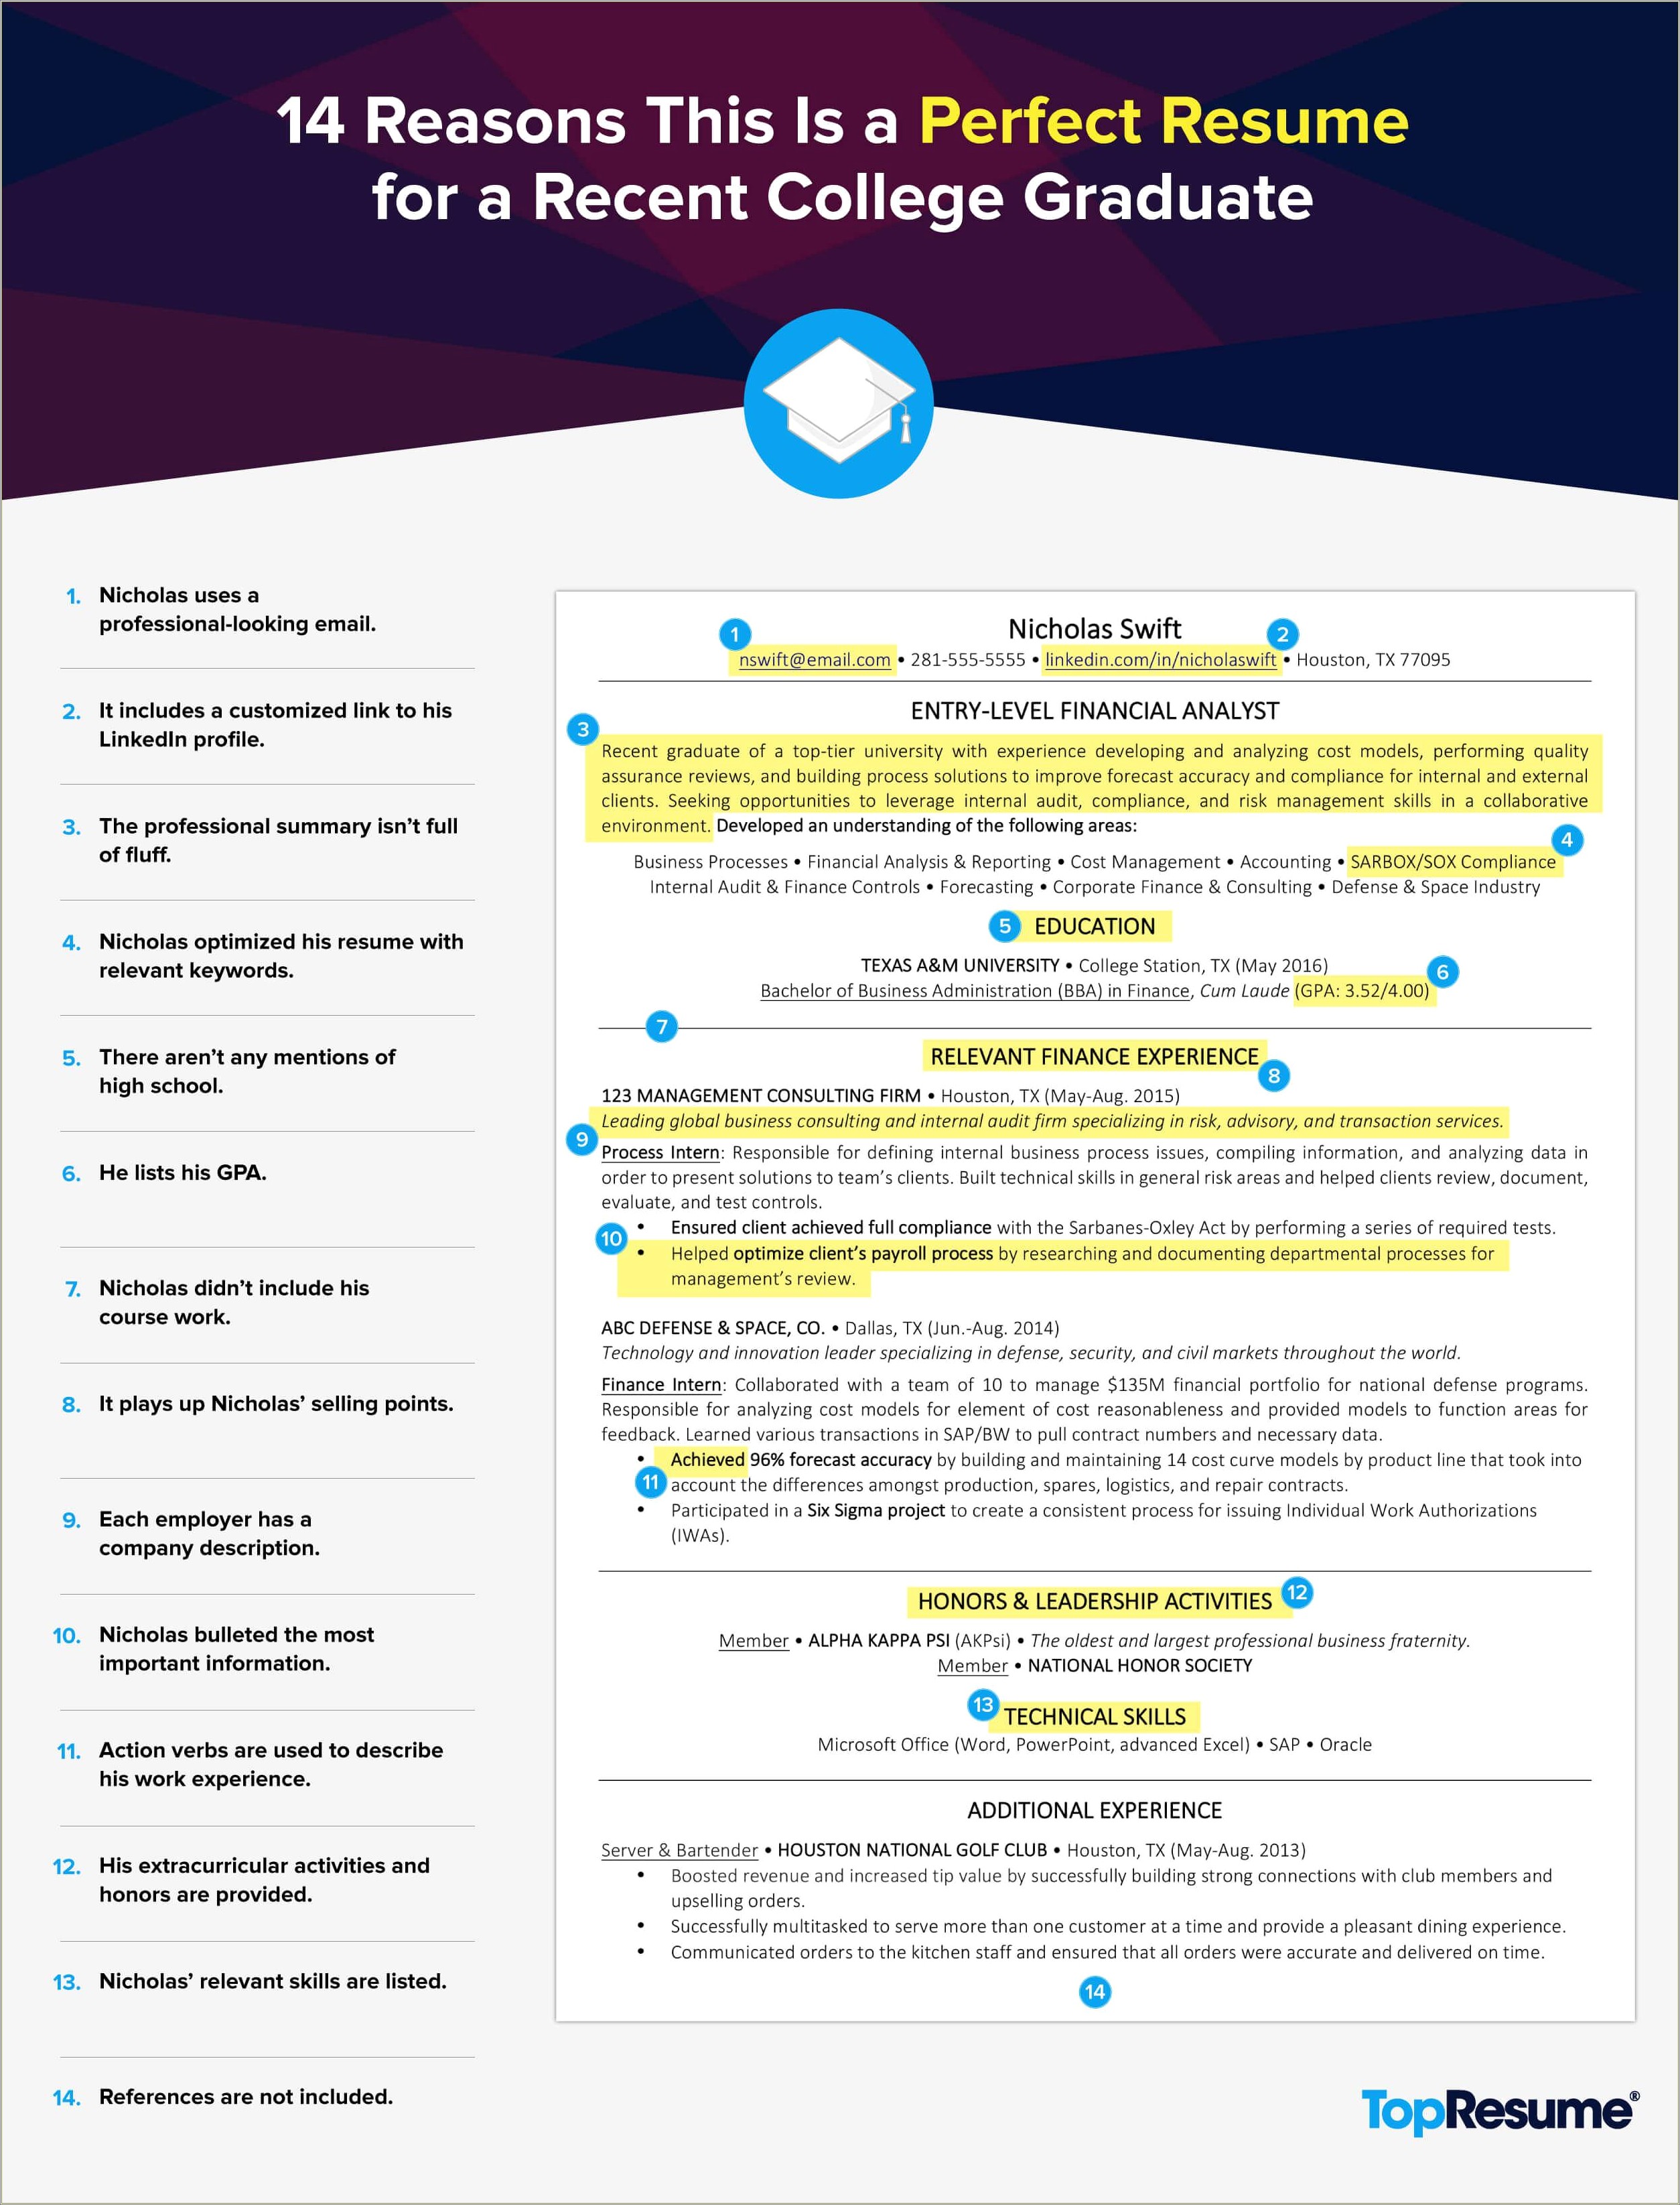 Resume Objective Examples For Fresh Graduates